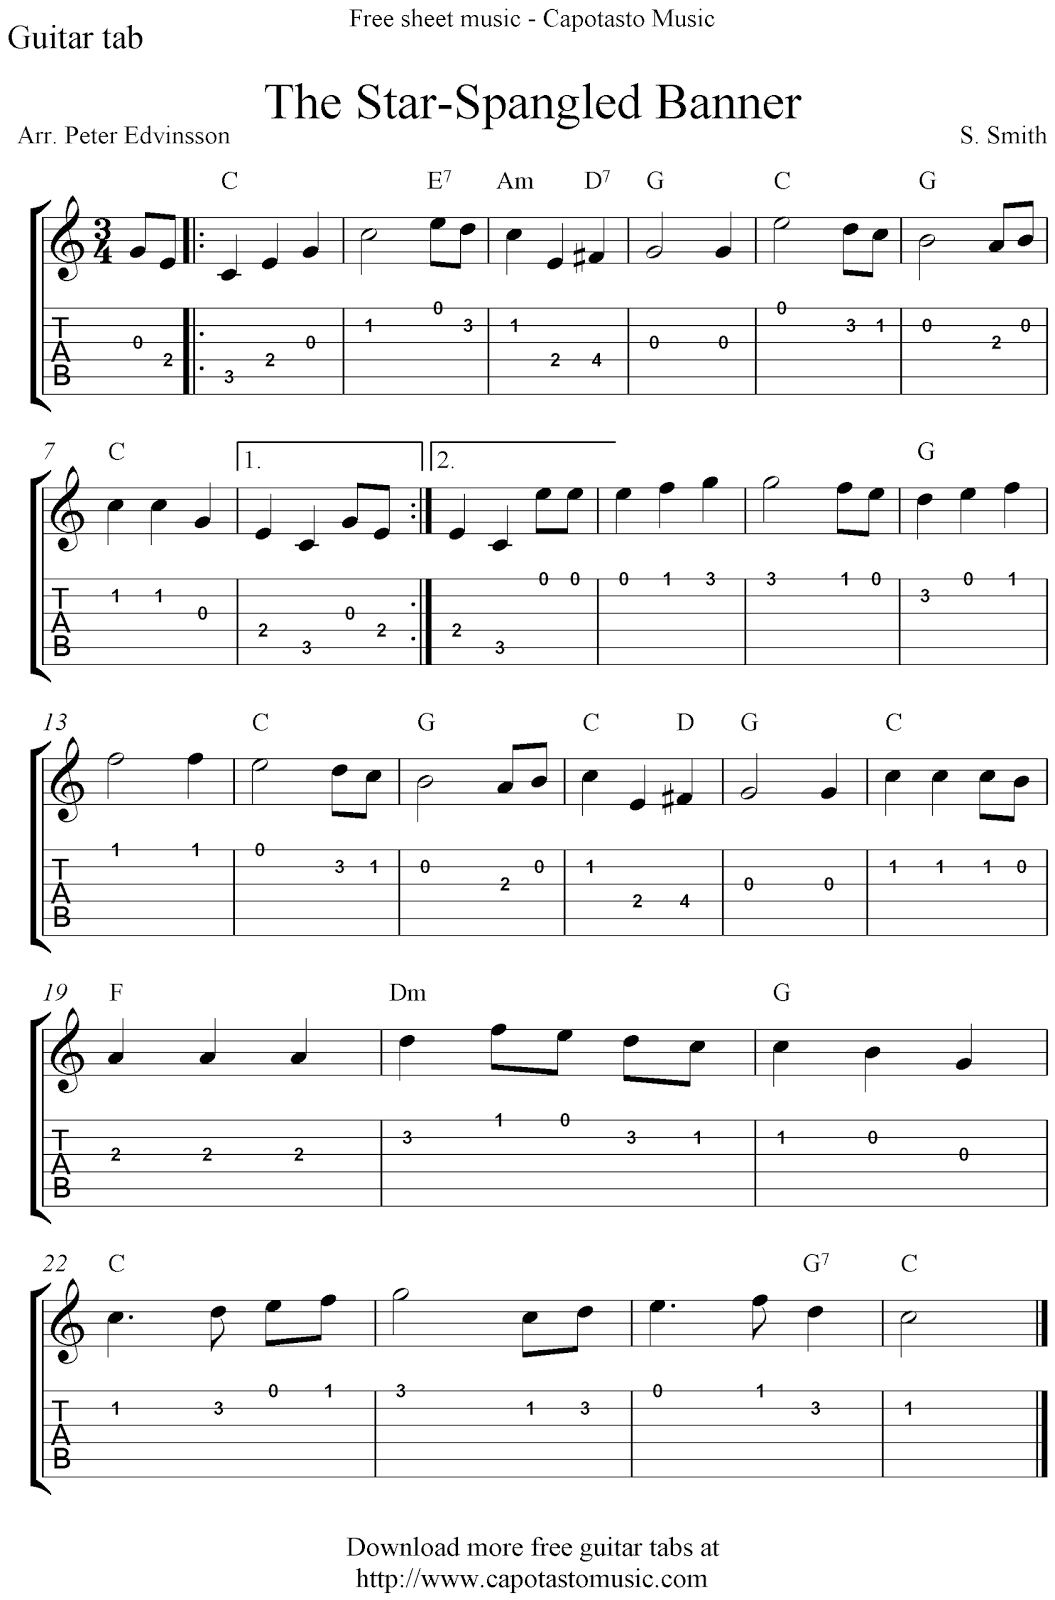 Easy Guitar Tab Sheet Music Score With The Melody The Star-Spangled - Free Printable Guitar Tabs For Beginners